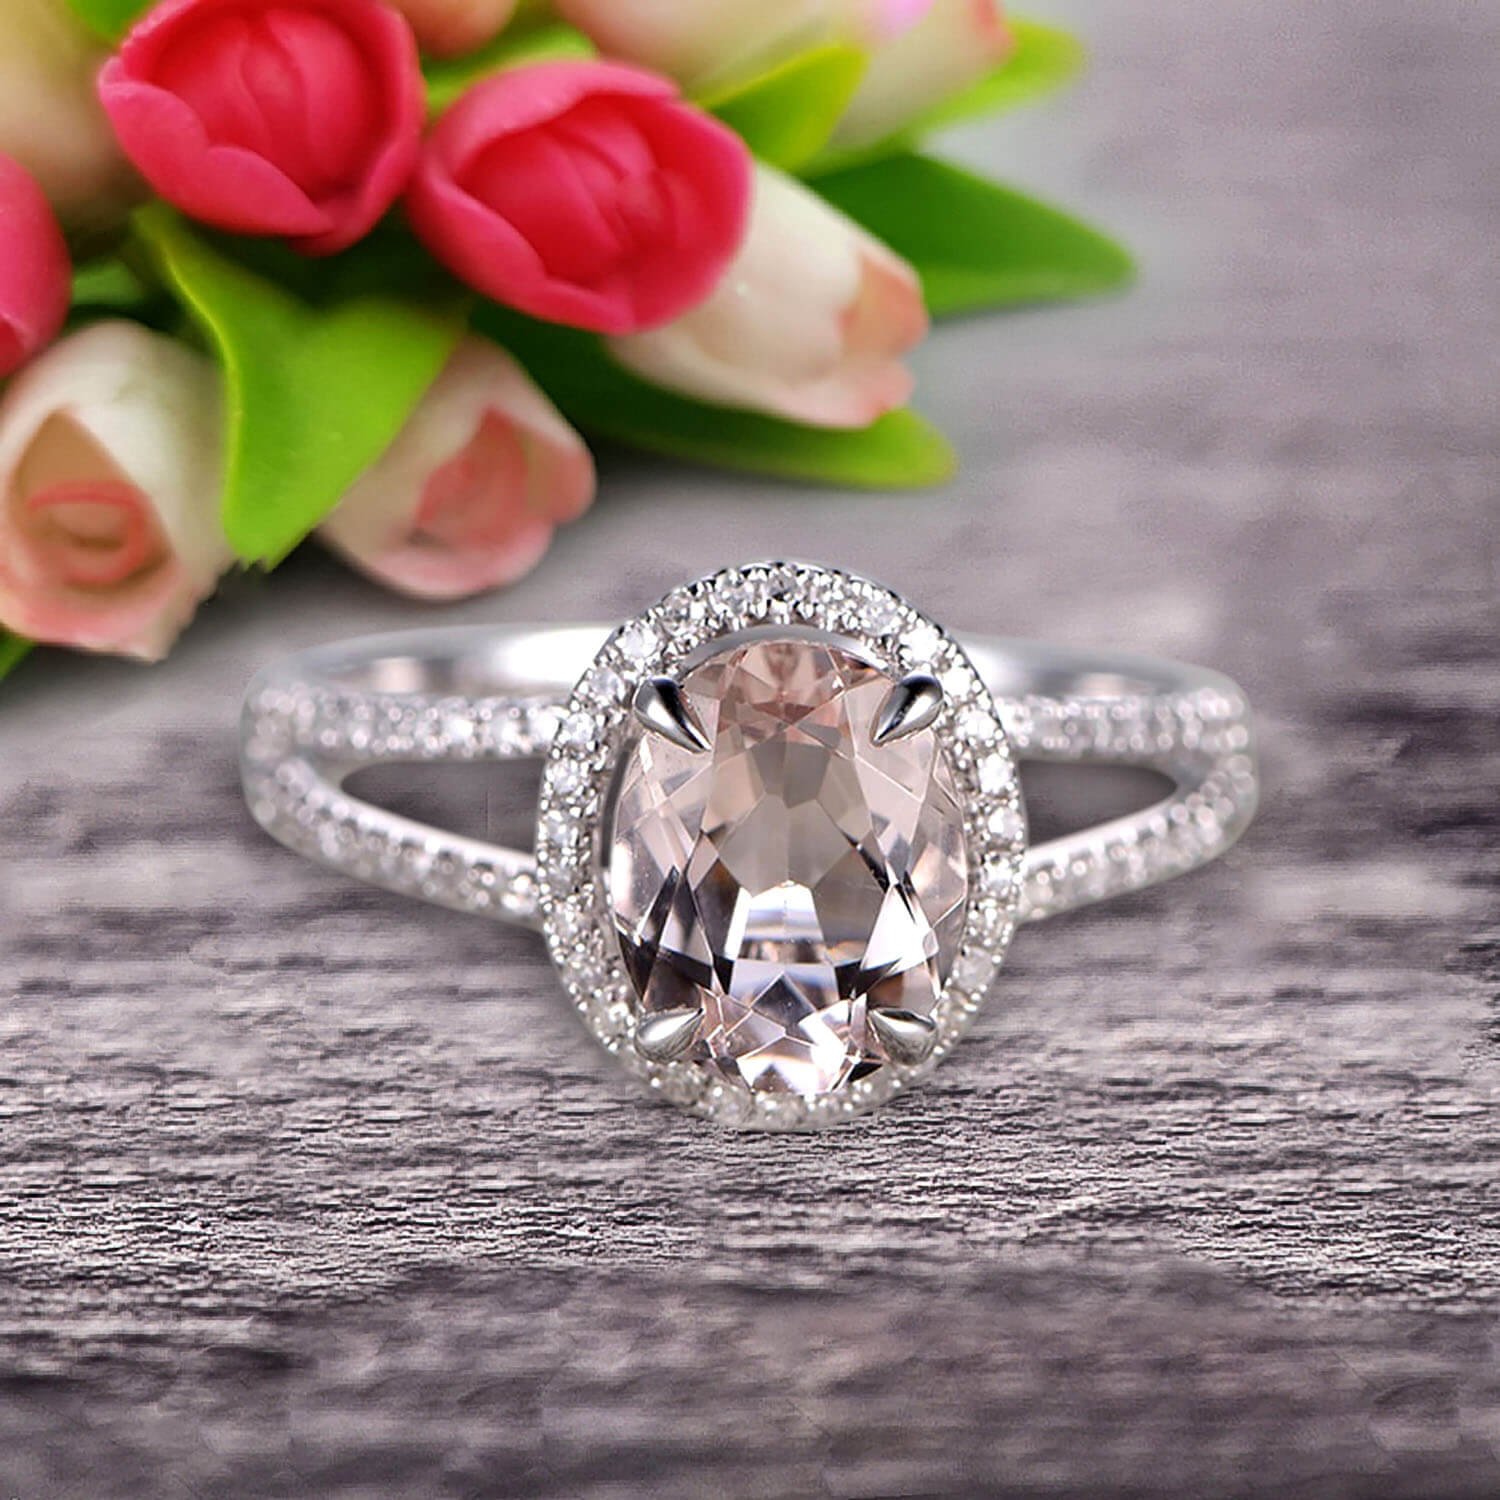 1.10 Carat Pear Cut Morganite And Diamond Moissanite Classic Engagement Ring,  Modern Wedding Ring in 925 Sterling Silver With 18k White Gold Plating,  Promise Ring, Dainty Ring, Anniversary Ring - Walmart.com